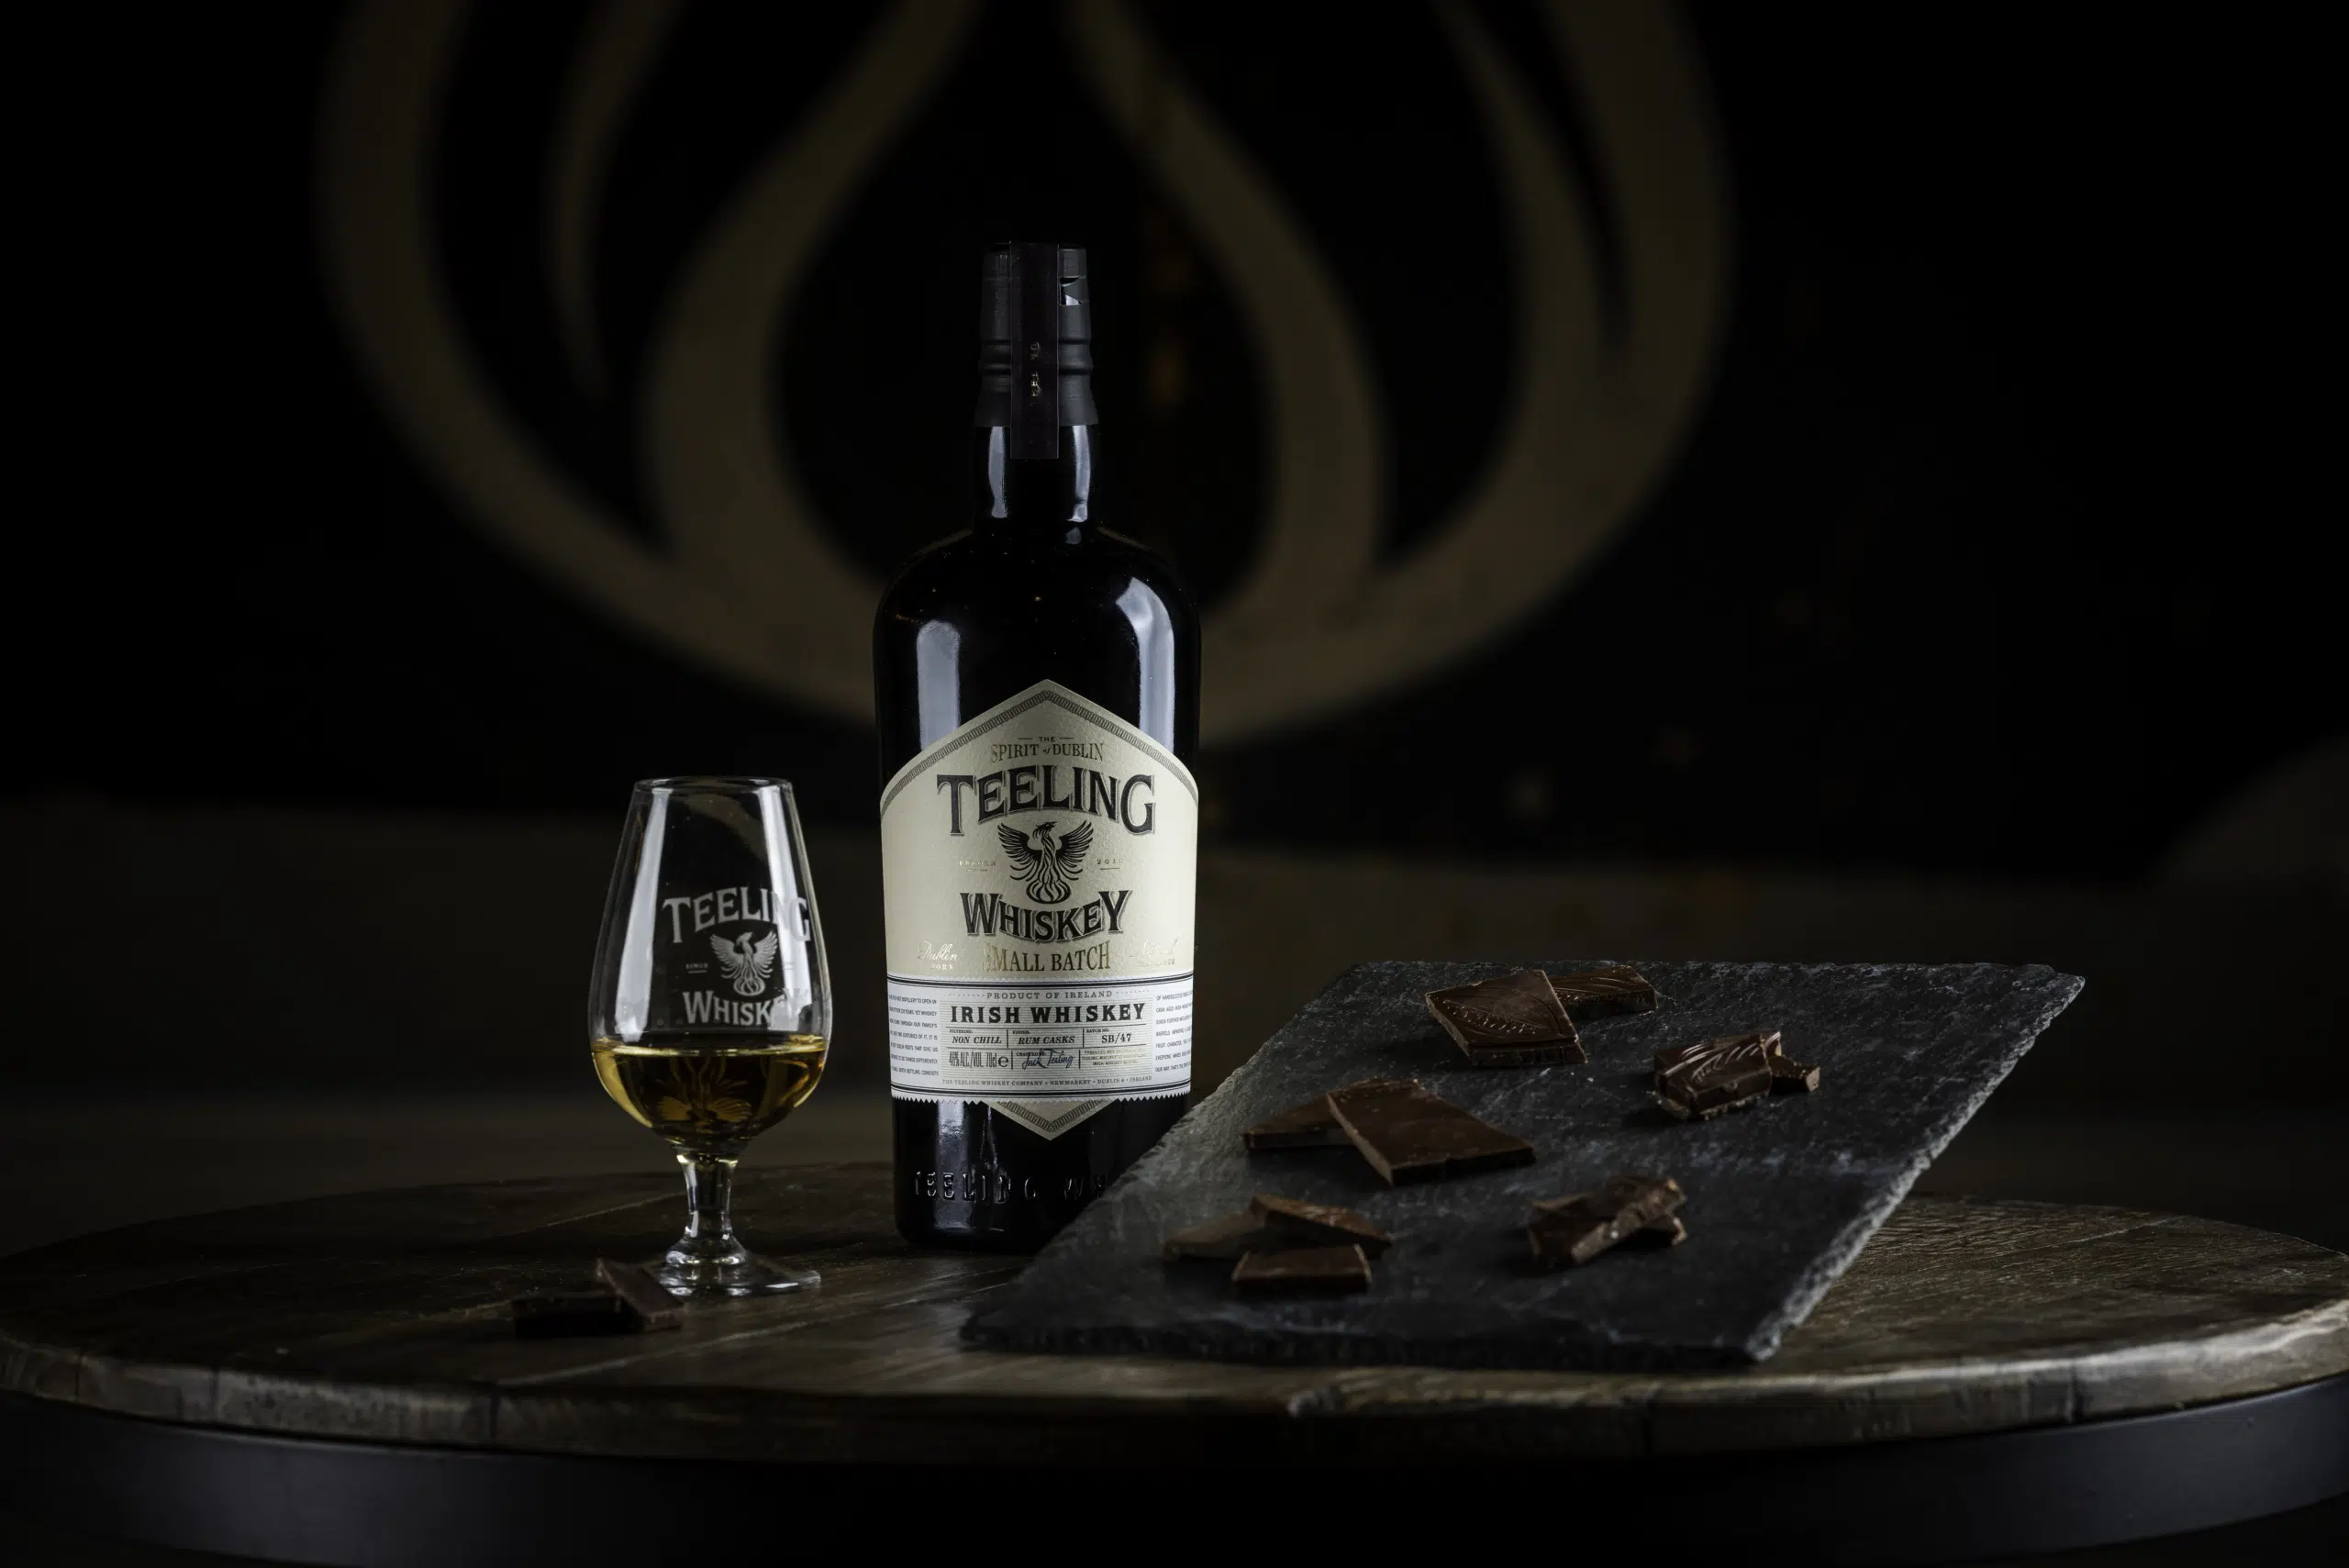 Teeling Whiskey Small Batch bottle with branded nosing glass and a selection of Dark Chocolate from Proper Chocolate Company Dubli